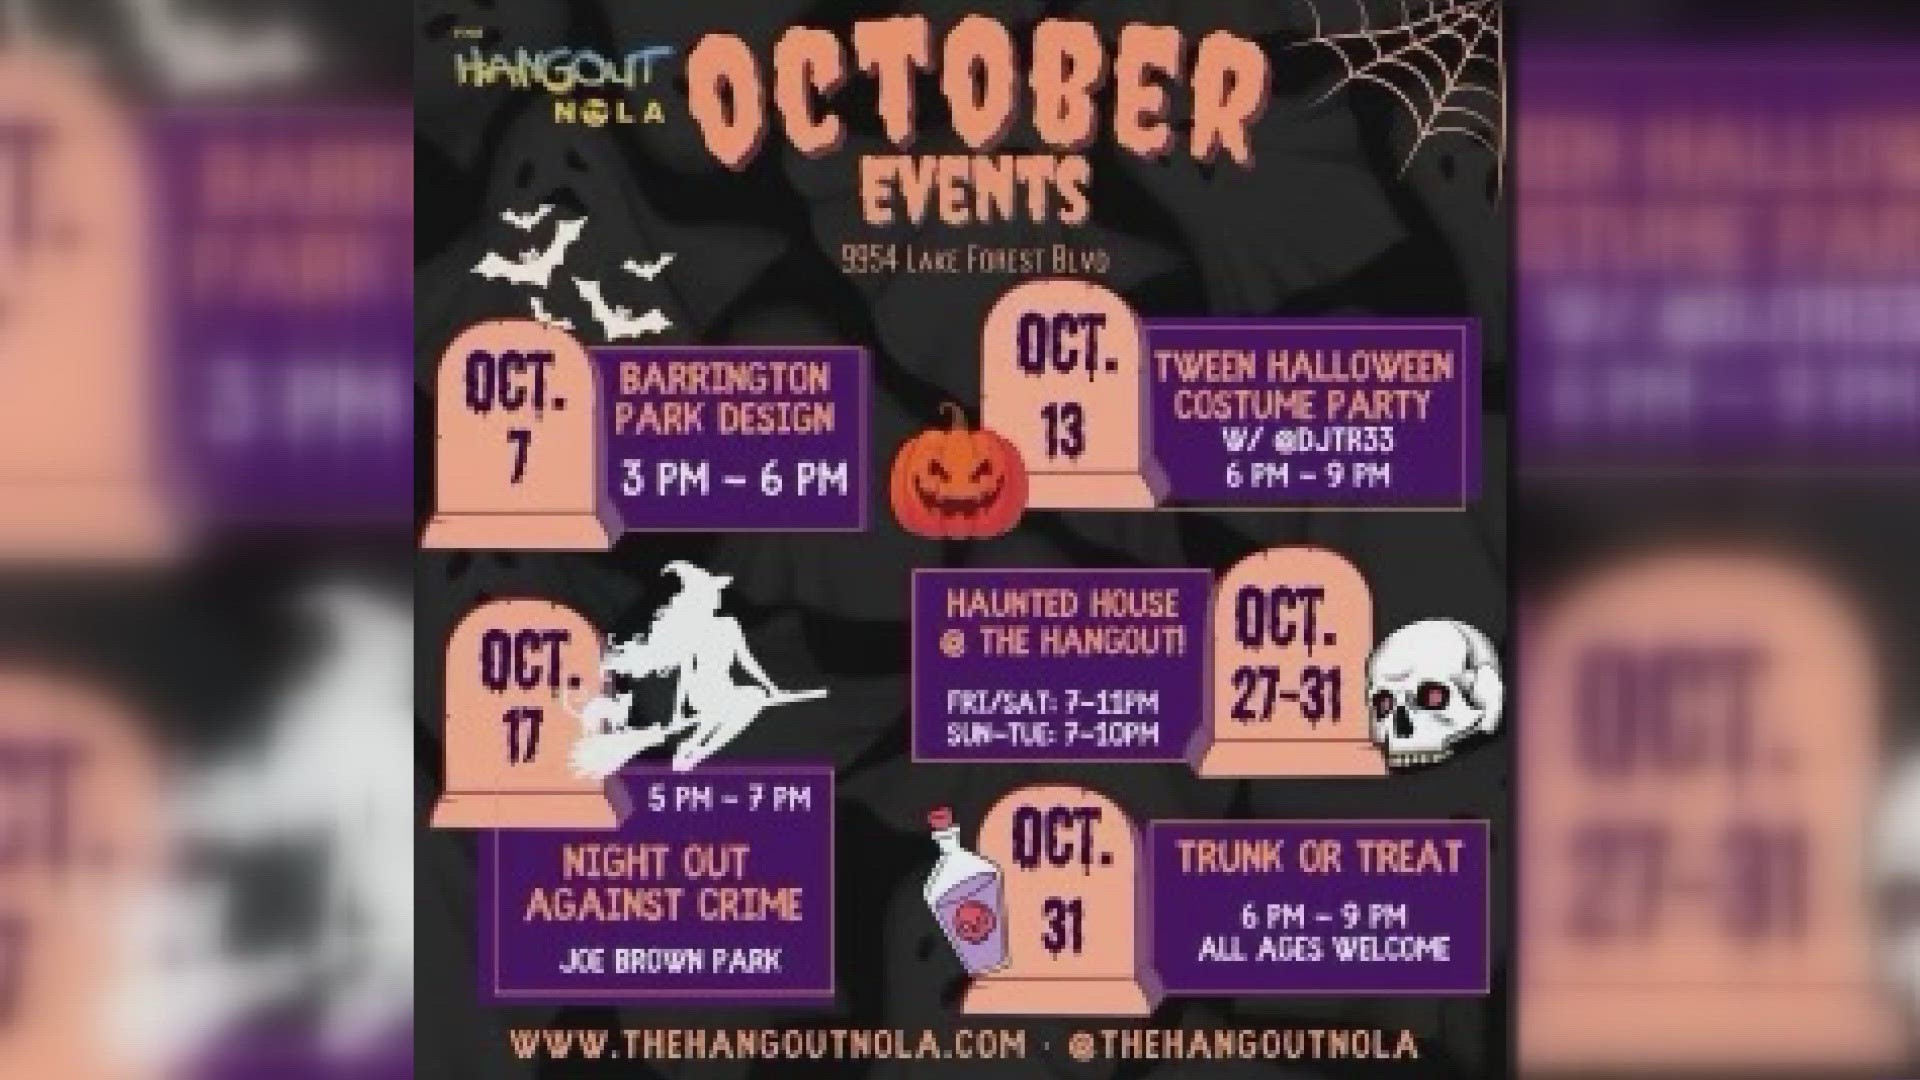 Halloween events at Hangout.